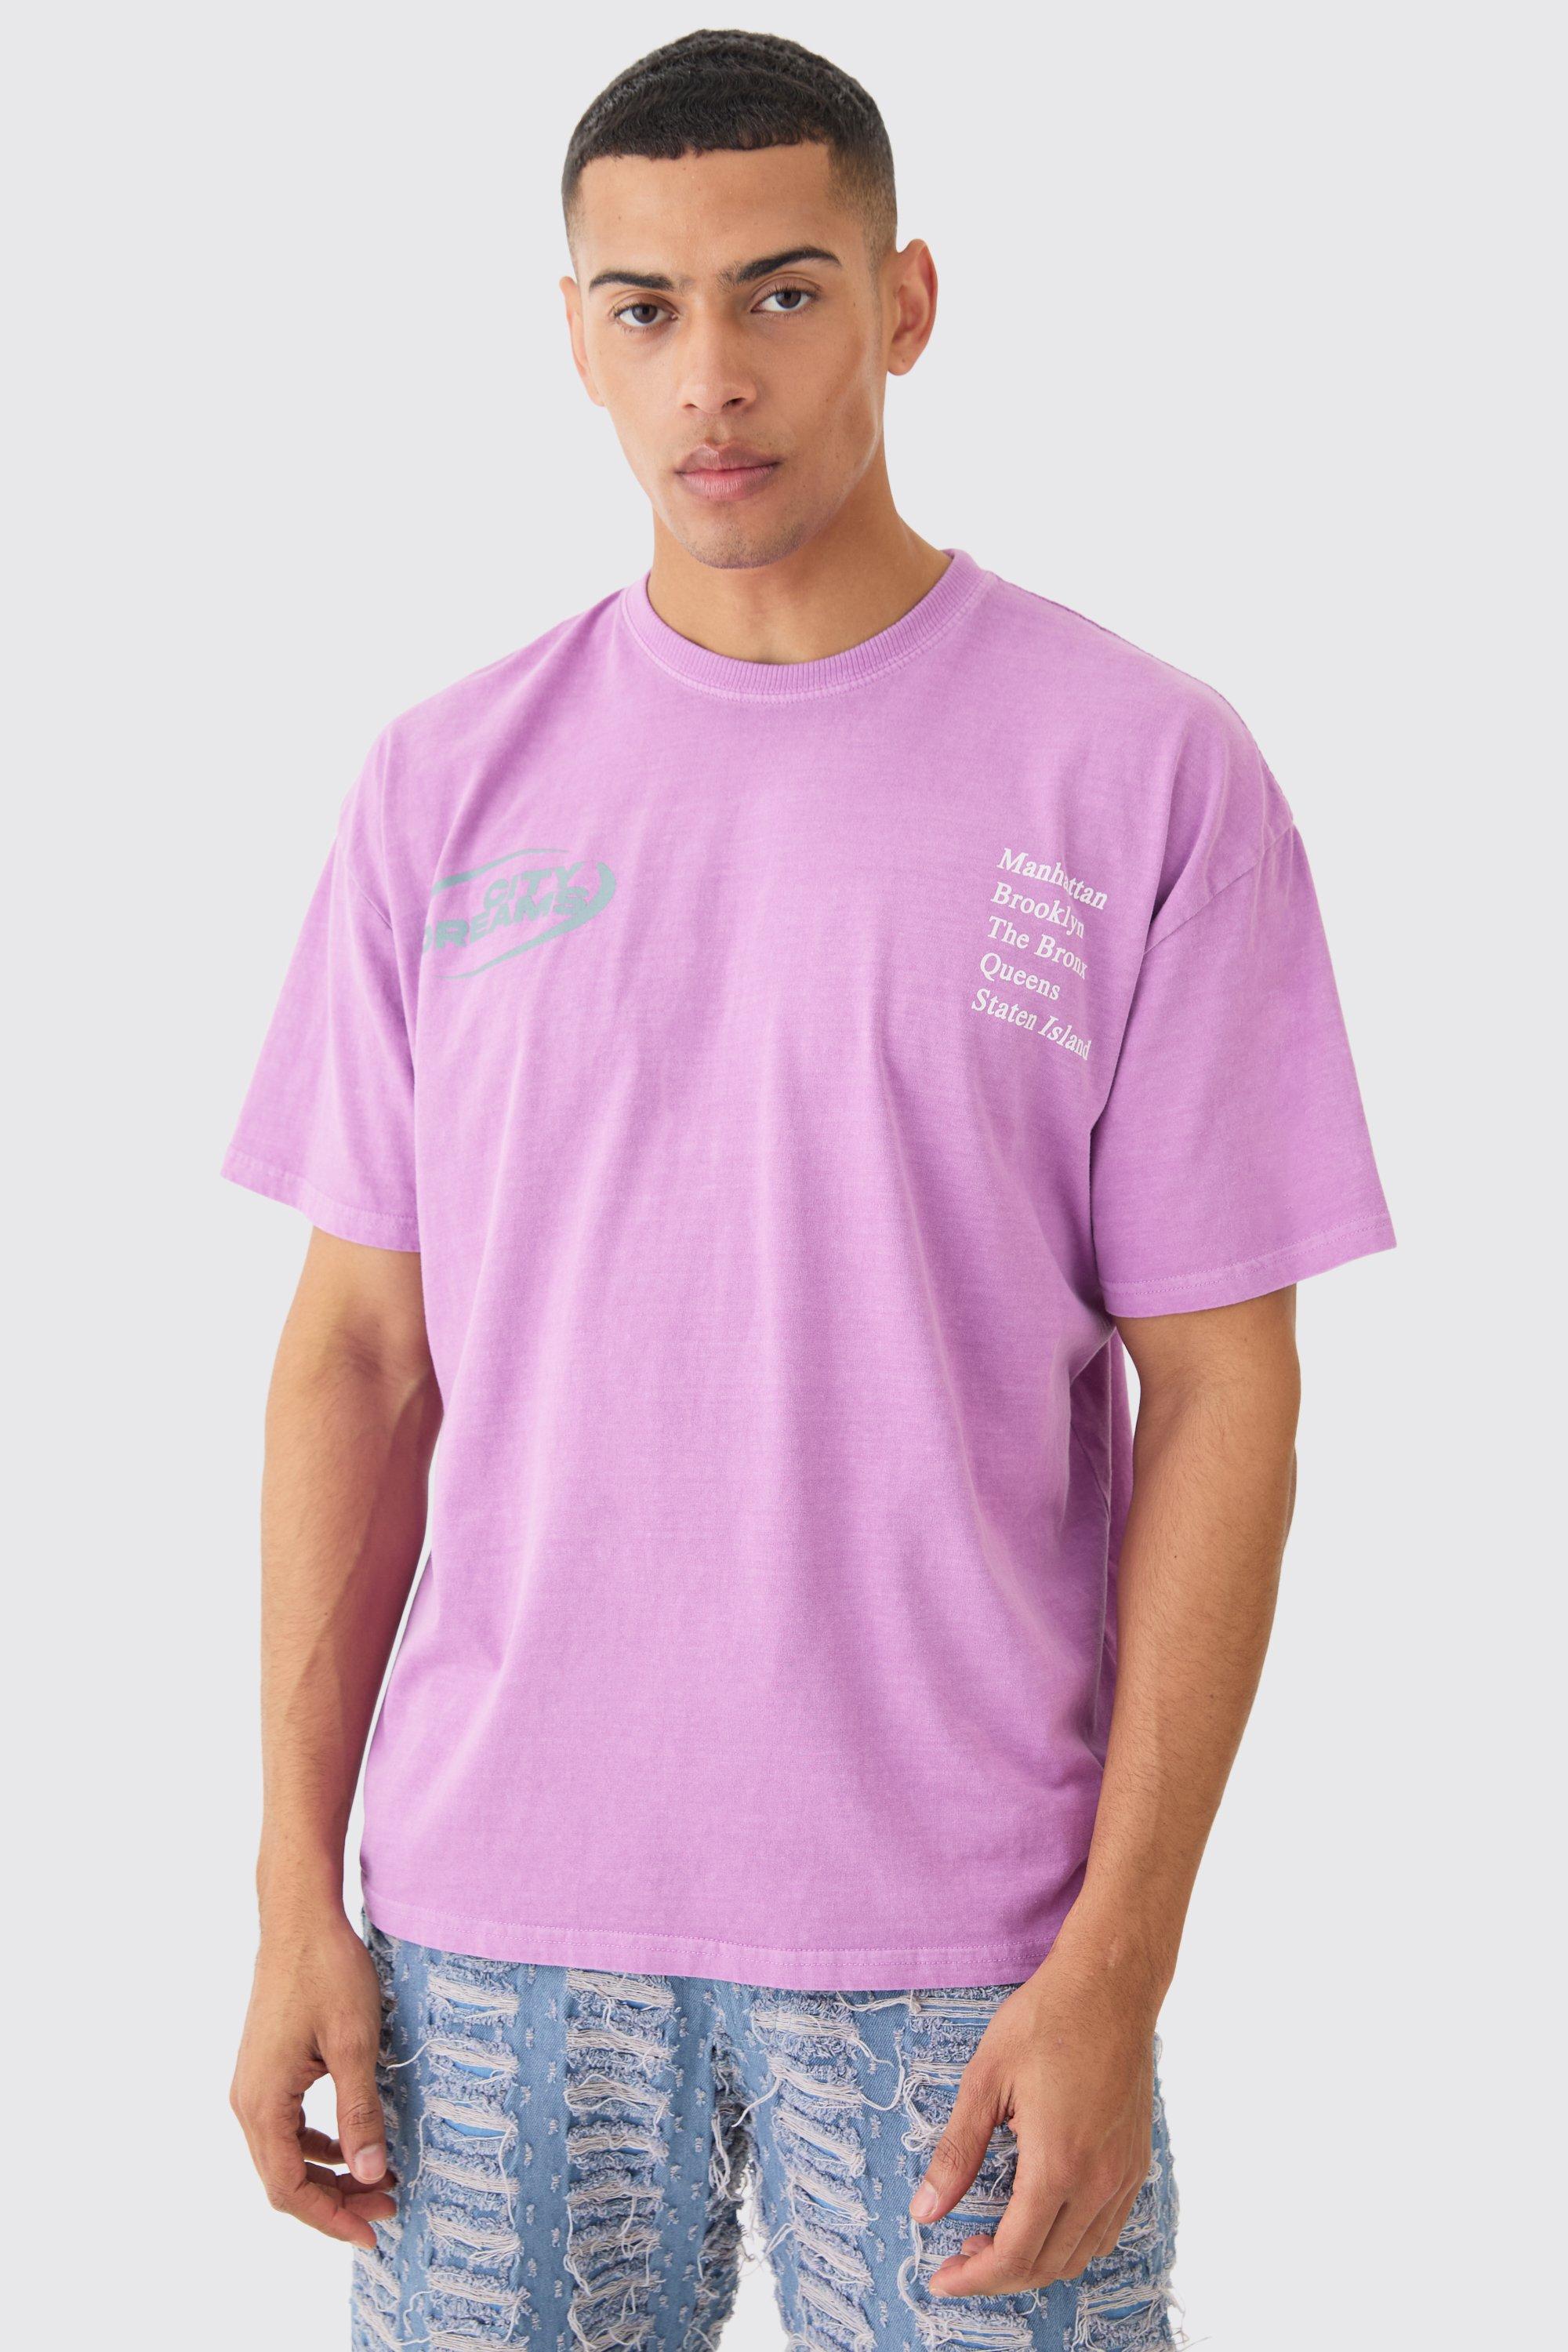 Image of Oversized City Dreams Washed T-shirt, Purple